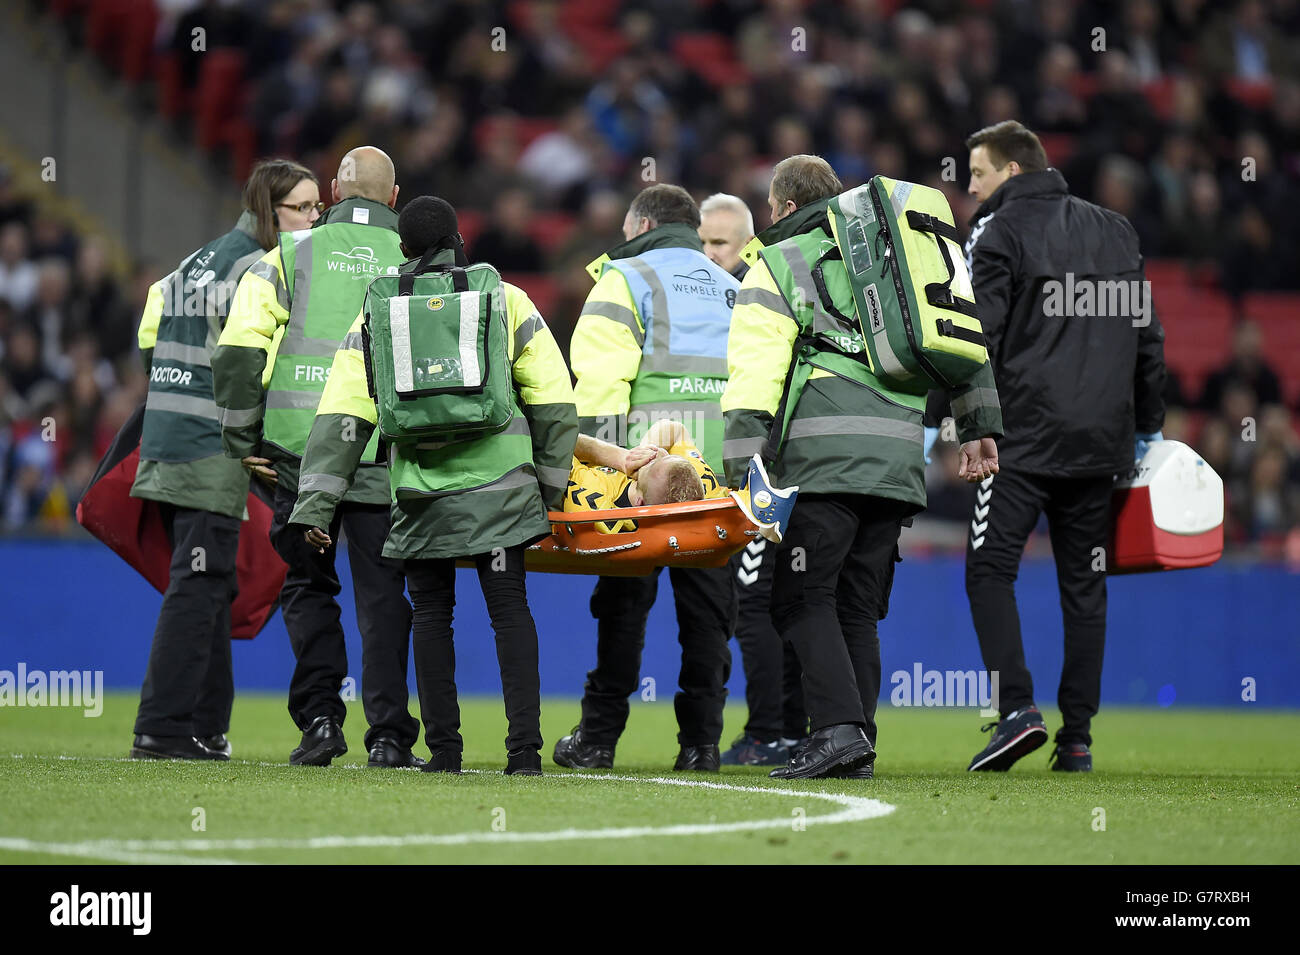 Lithuania's Vytautas Andriuskevicius gets taken off on a stretcher during the UEFA 2016 Qualifying, Group E match at Wembley Stadium, London. Stock Photo